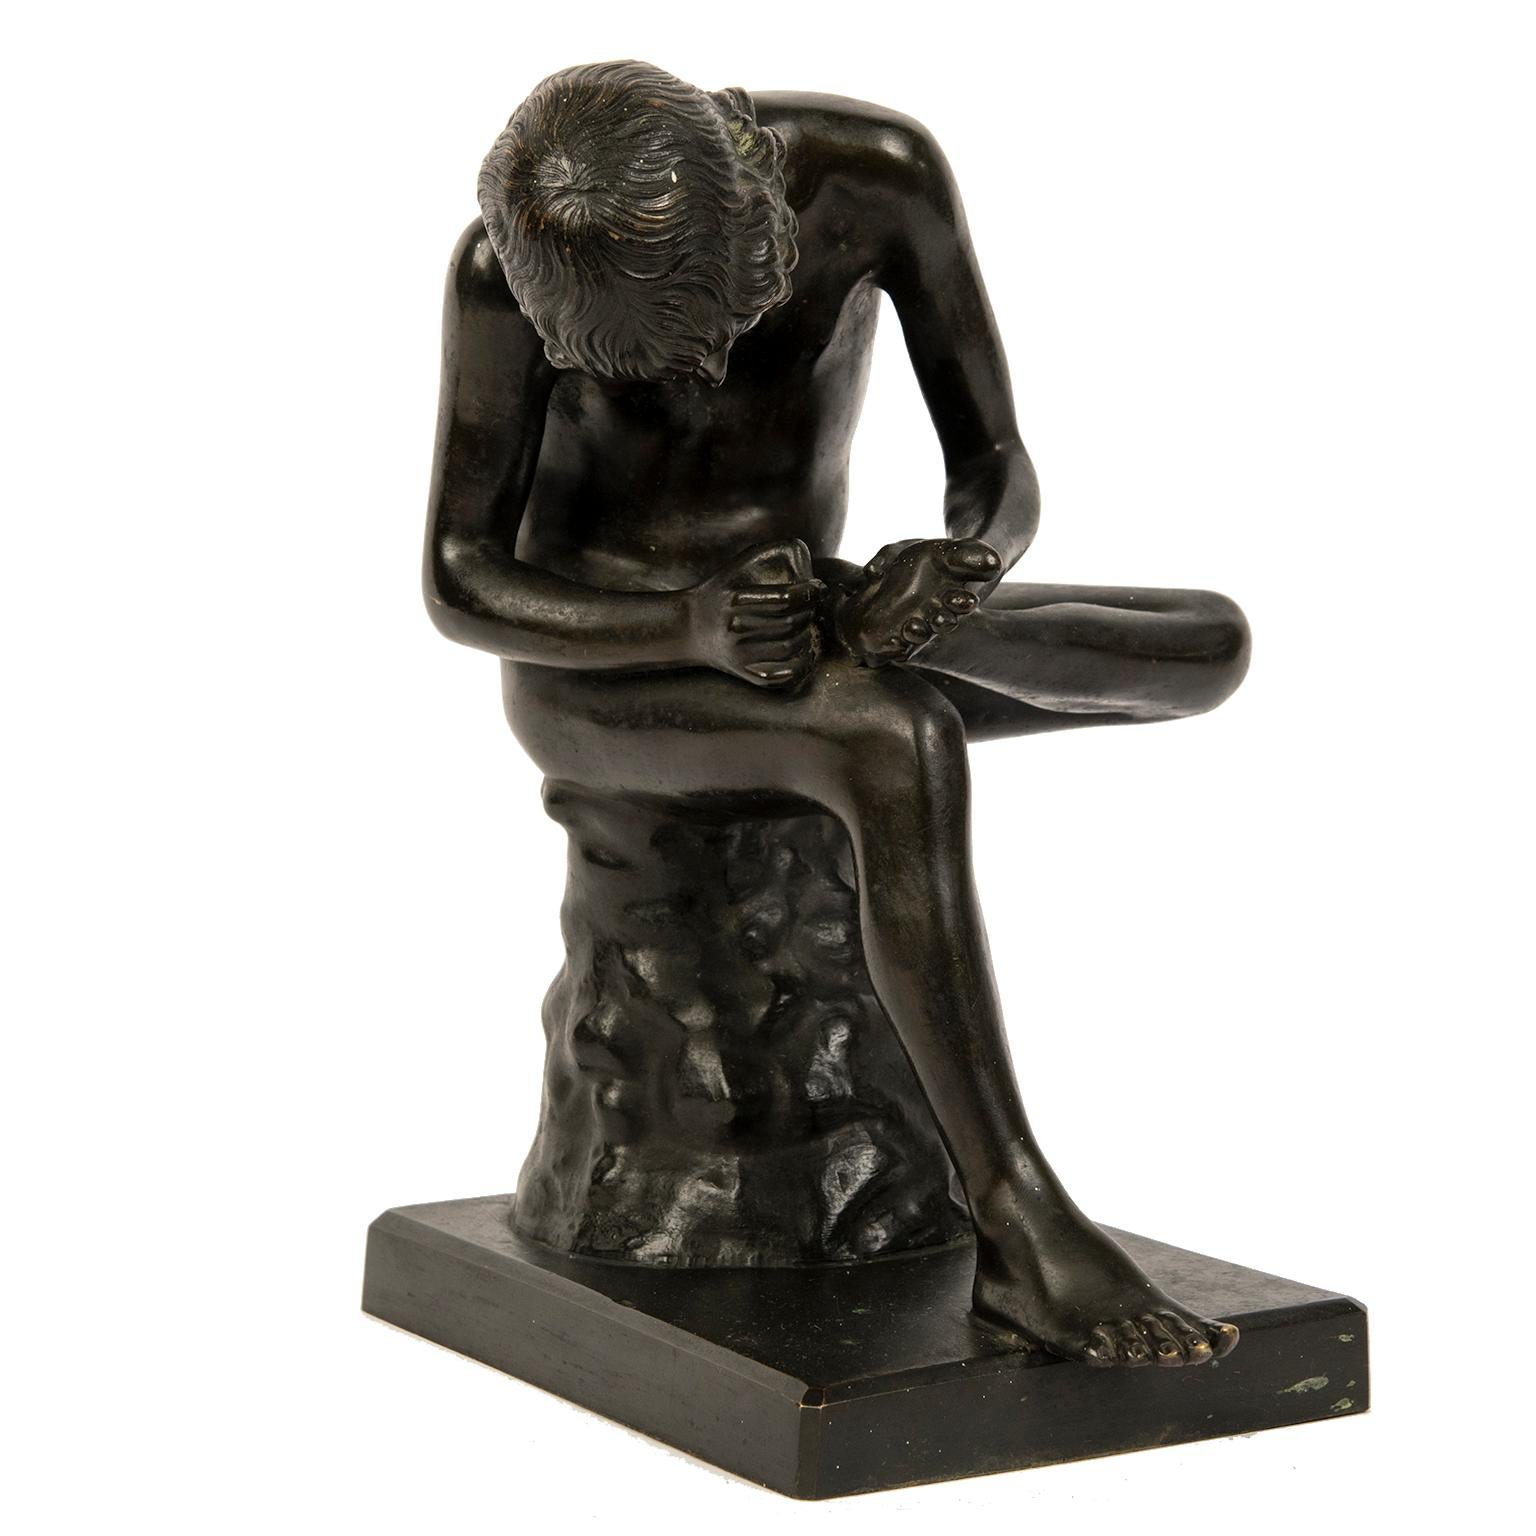 Cast Grand Tour “Boy with Thorn” or Spinario Bronze Sculpture